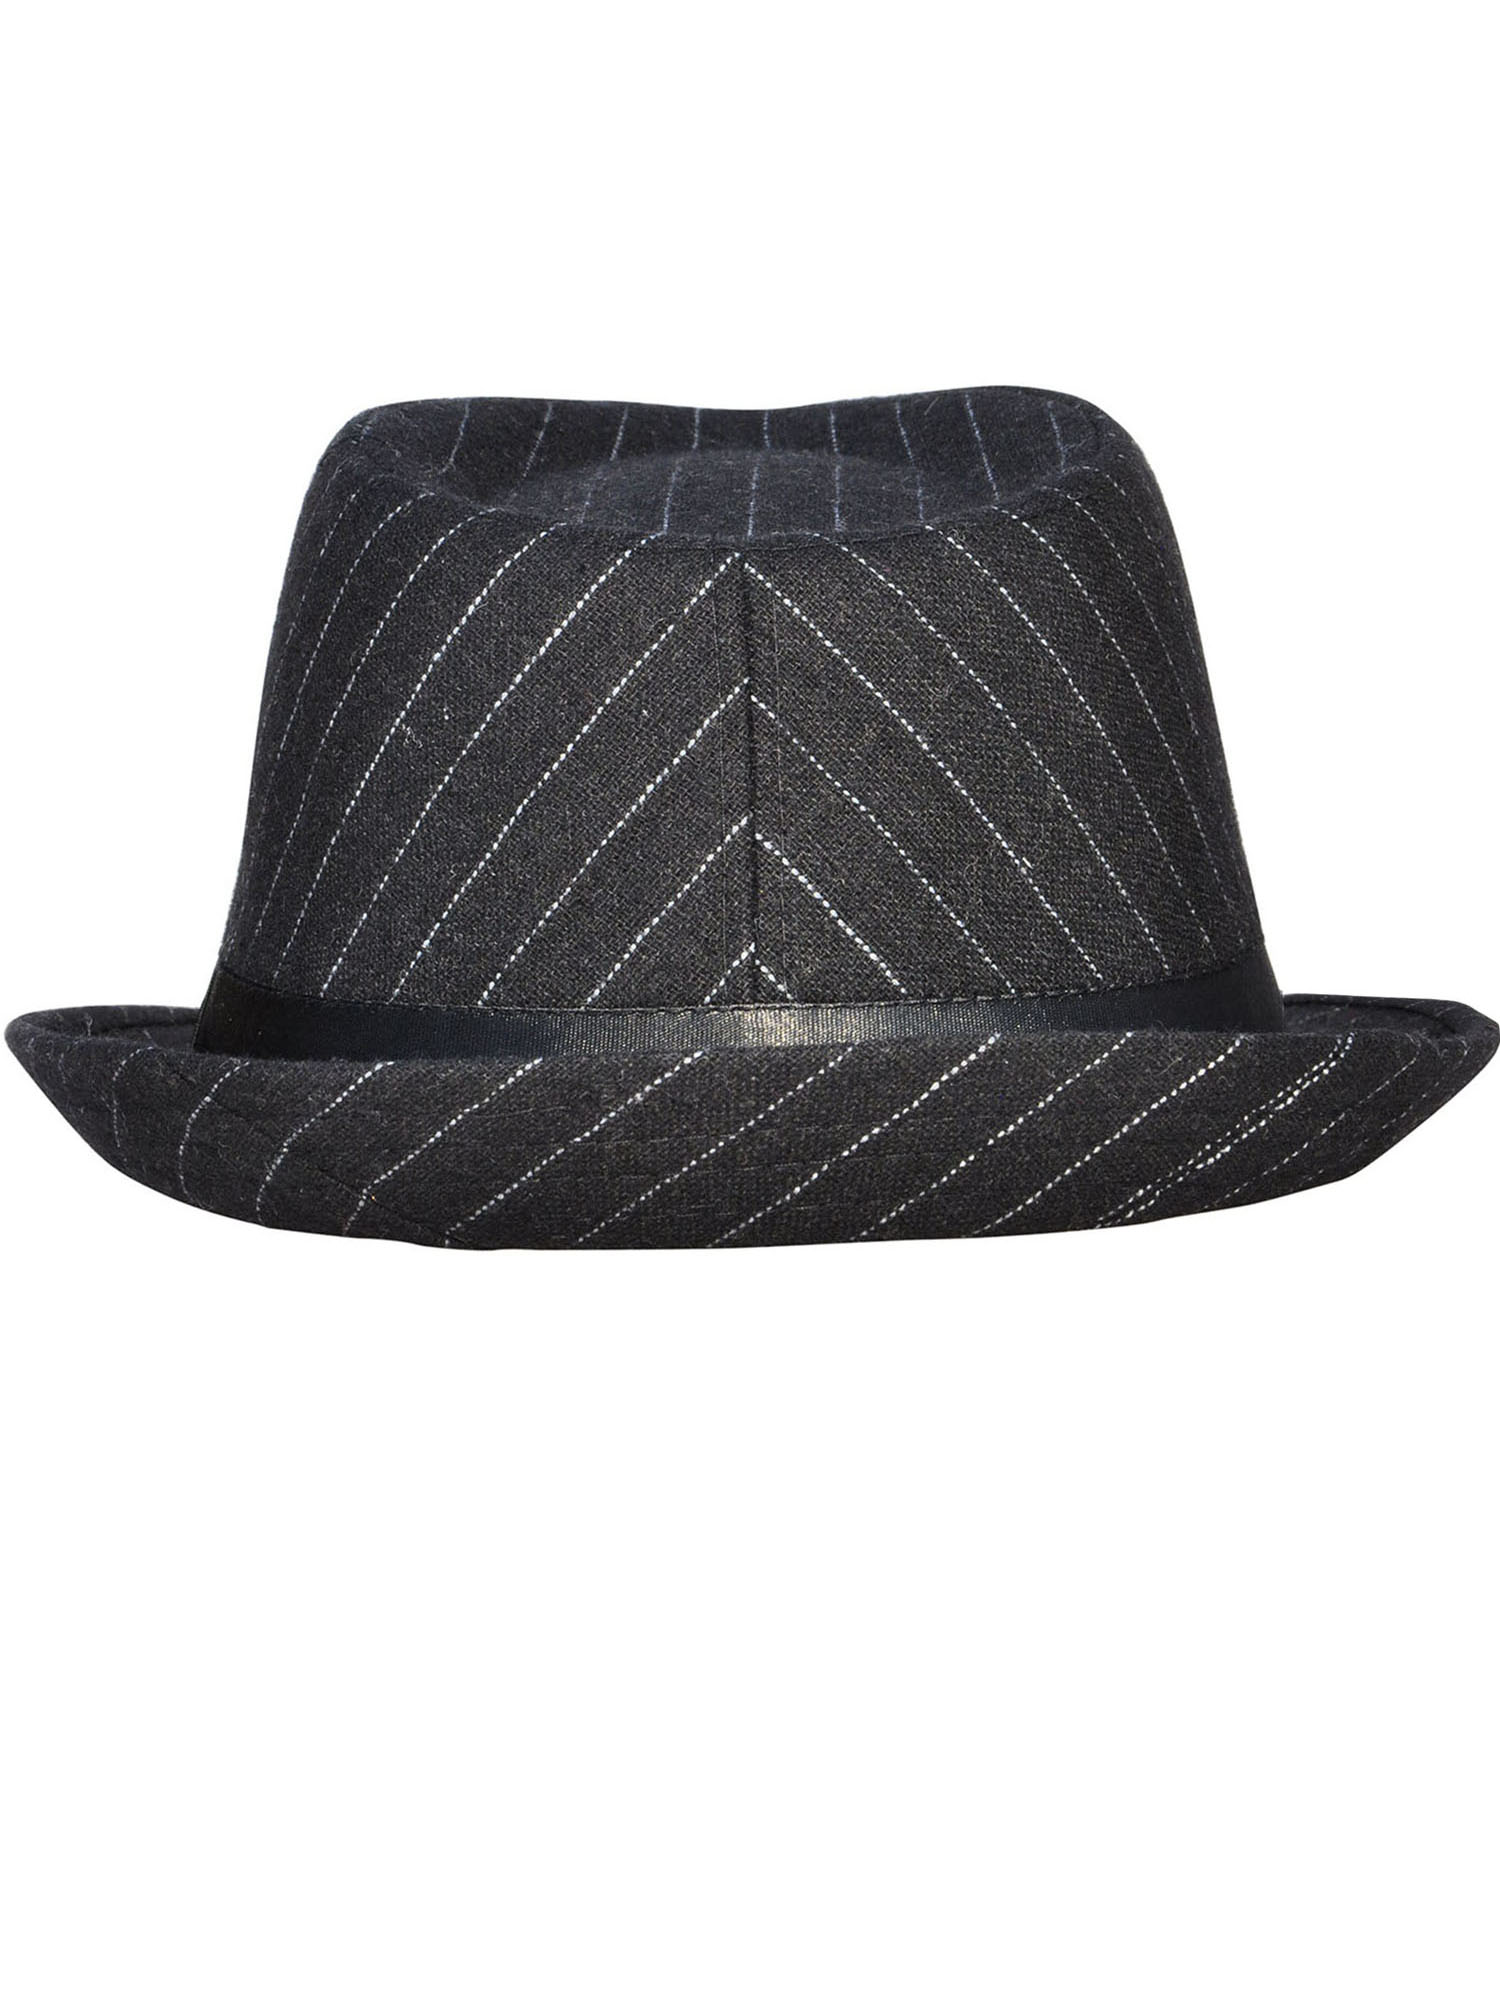 Mens Cool Fedora Trilby Hat Pinstripe with Black Band - image 4 of 4